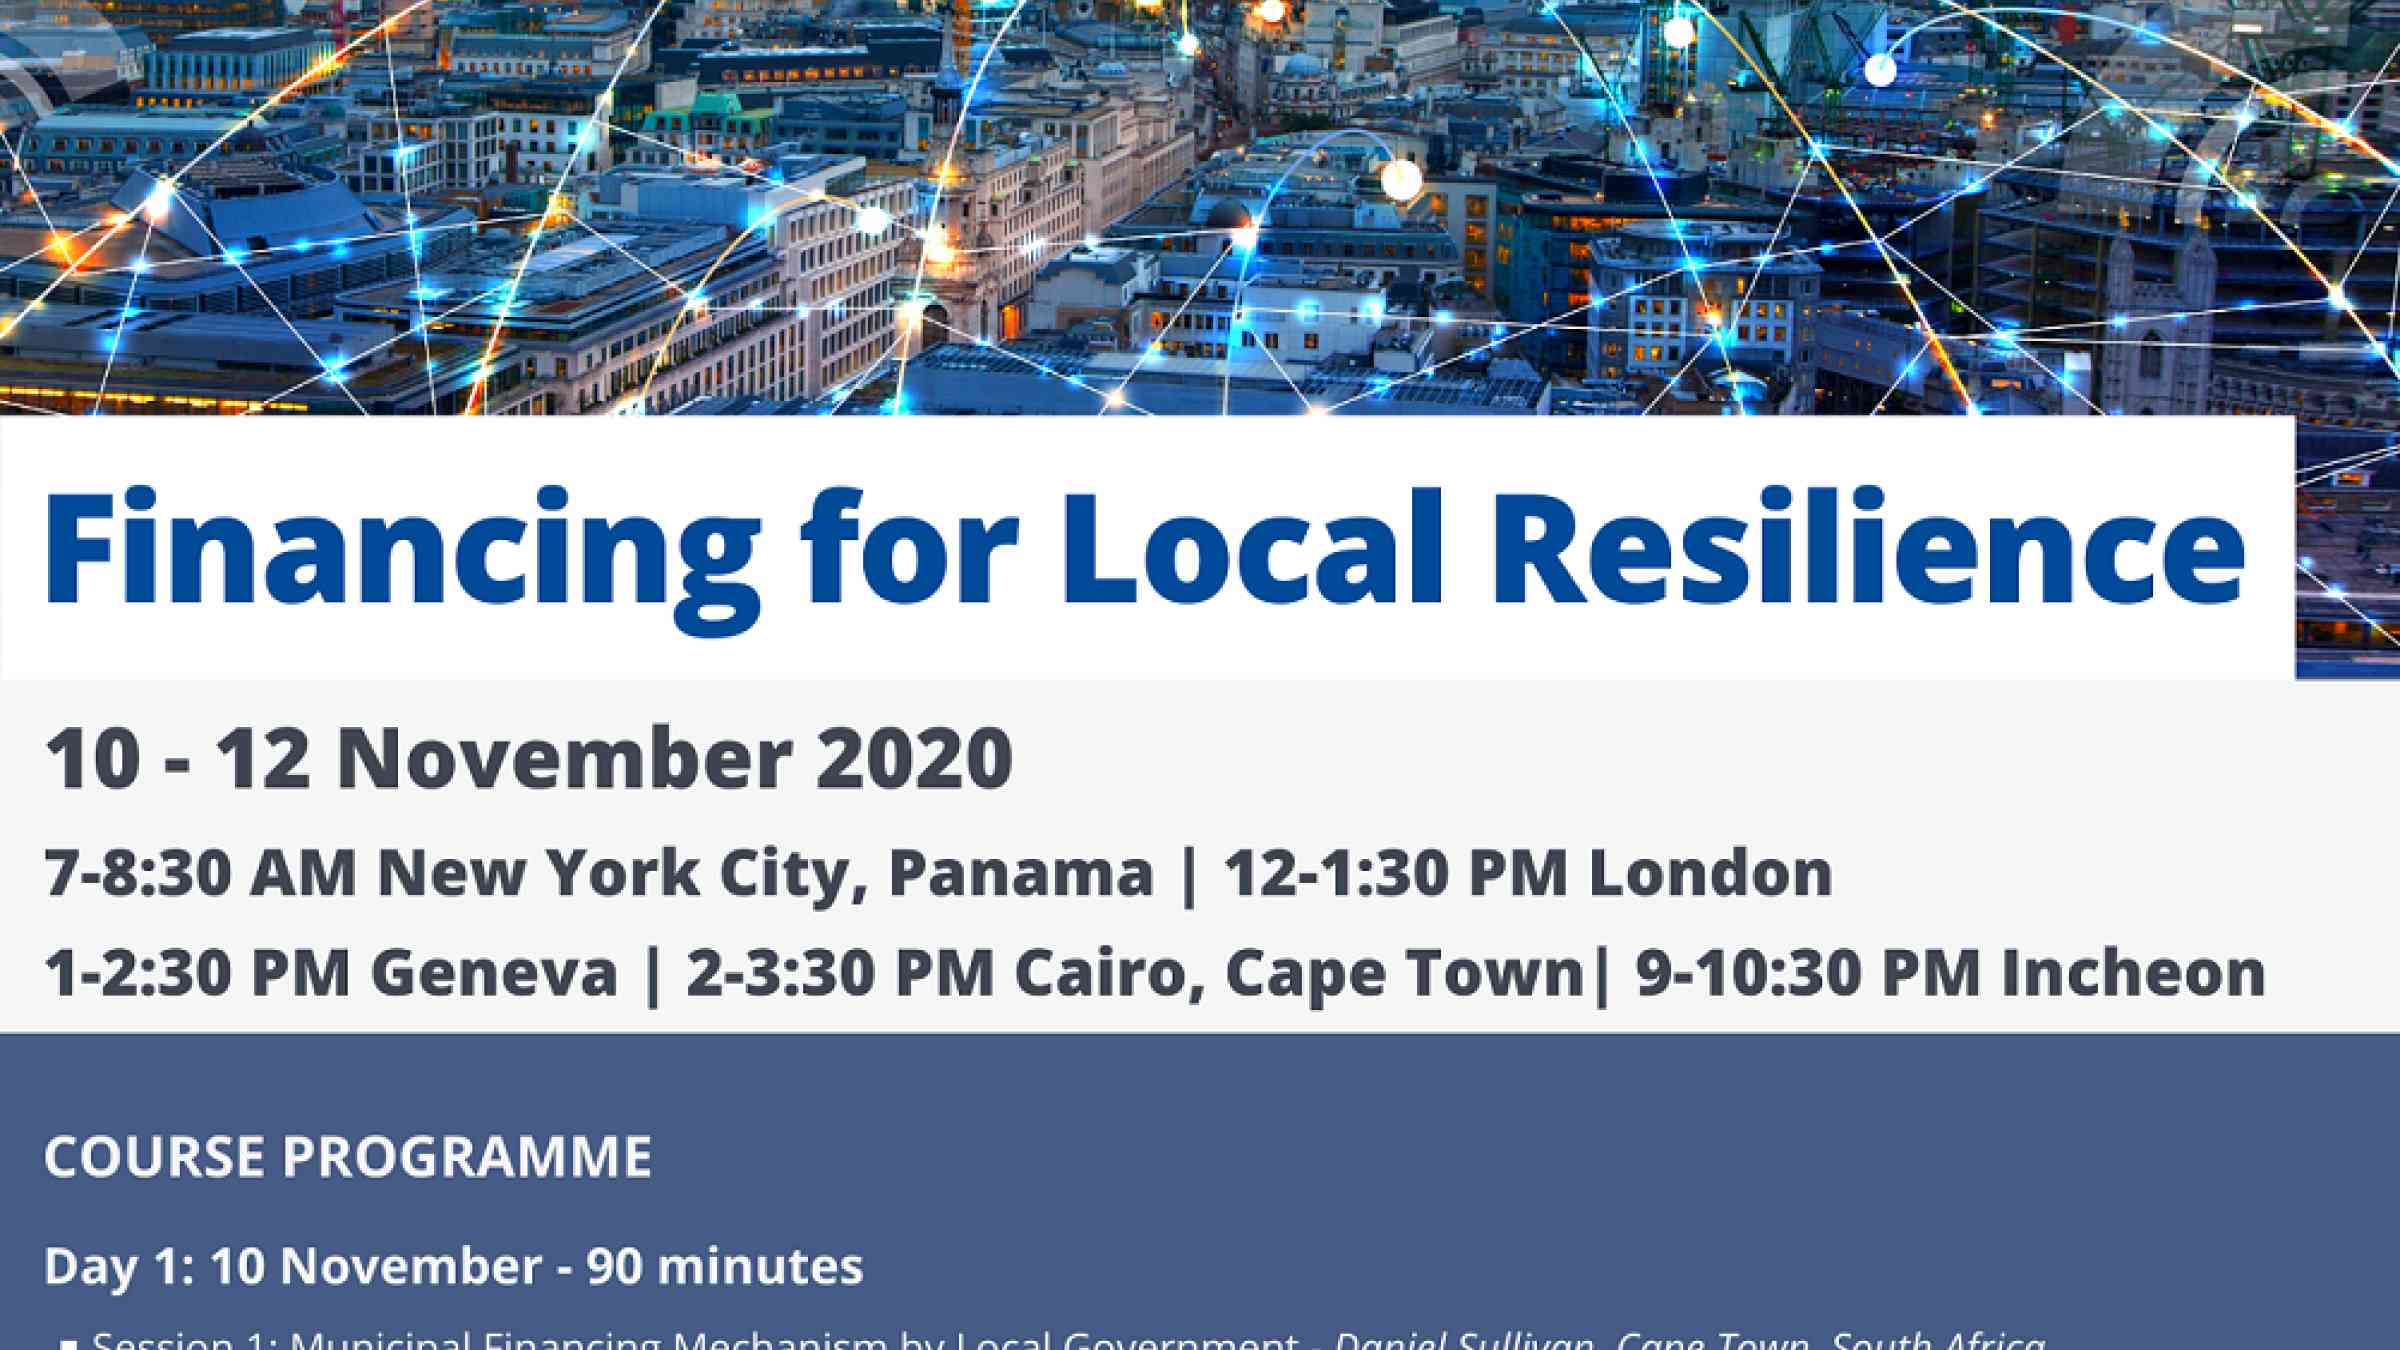 Financing for local resilience flyer